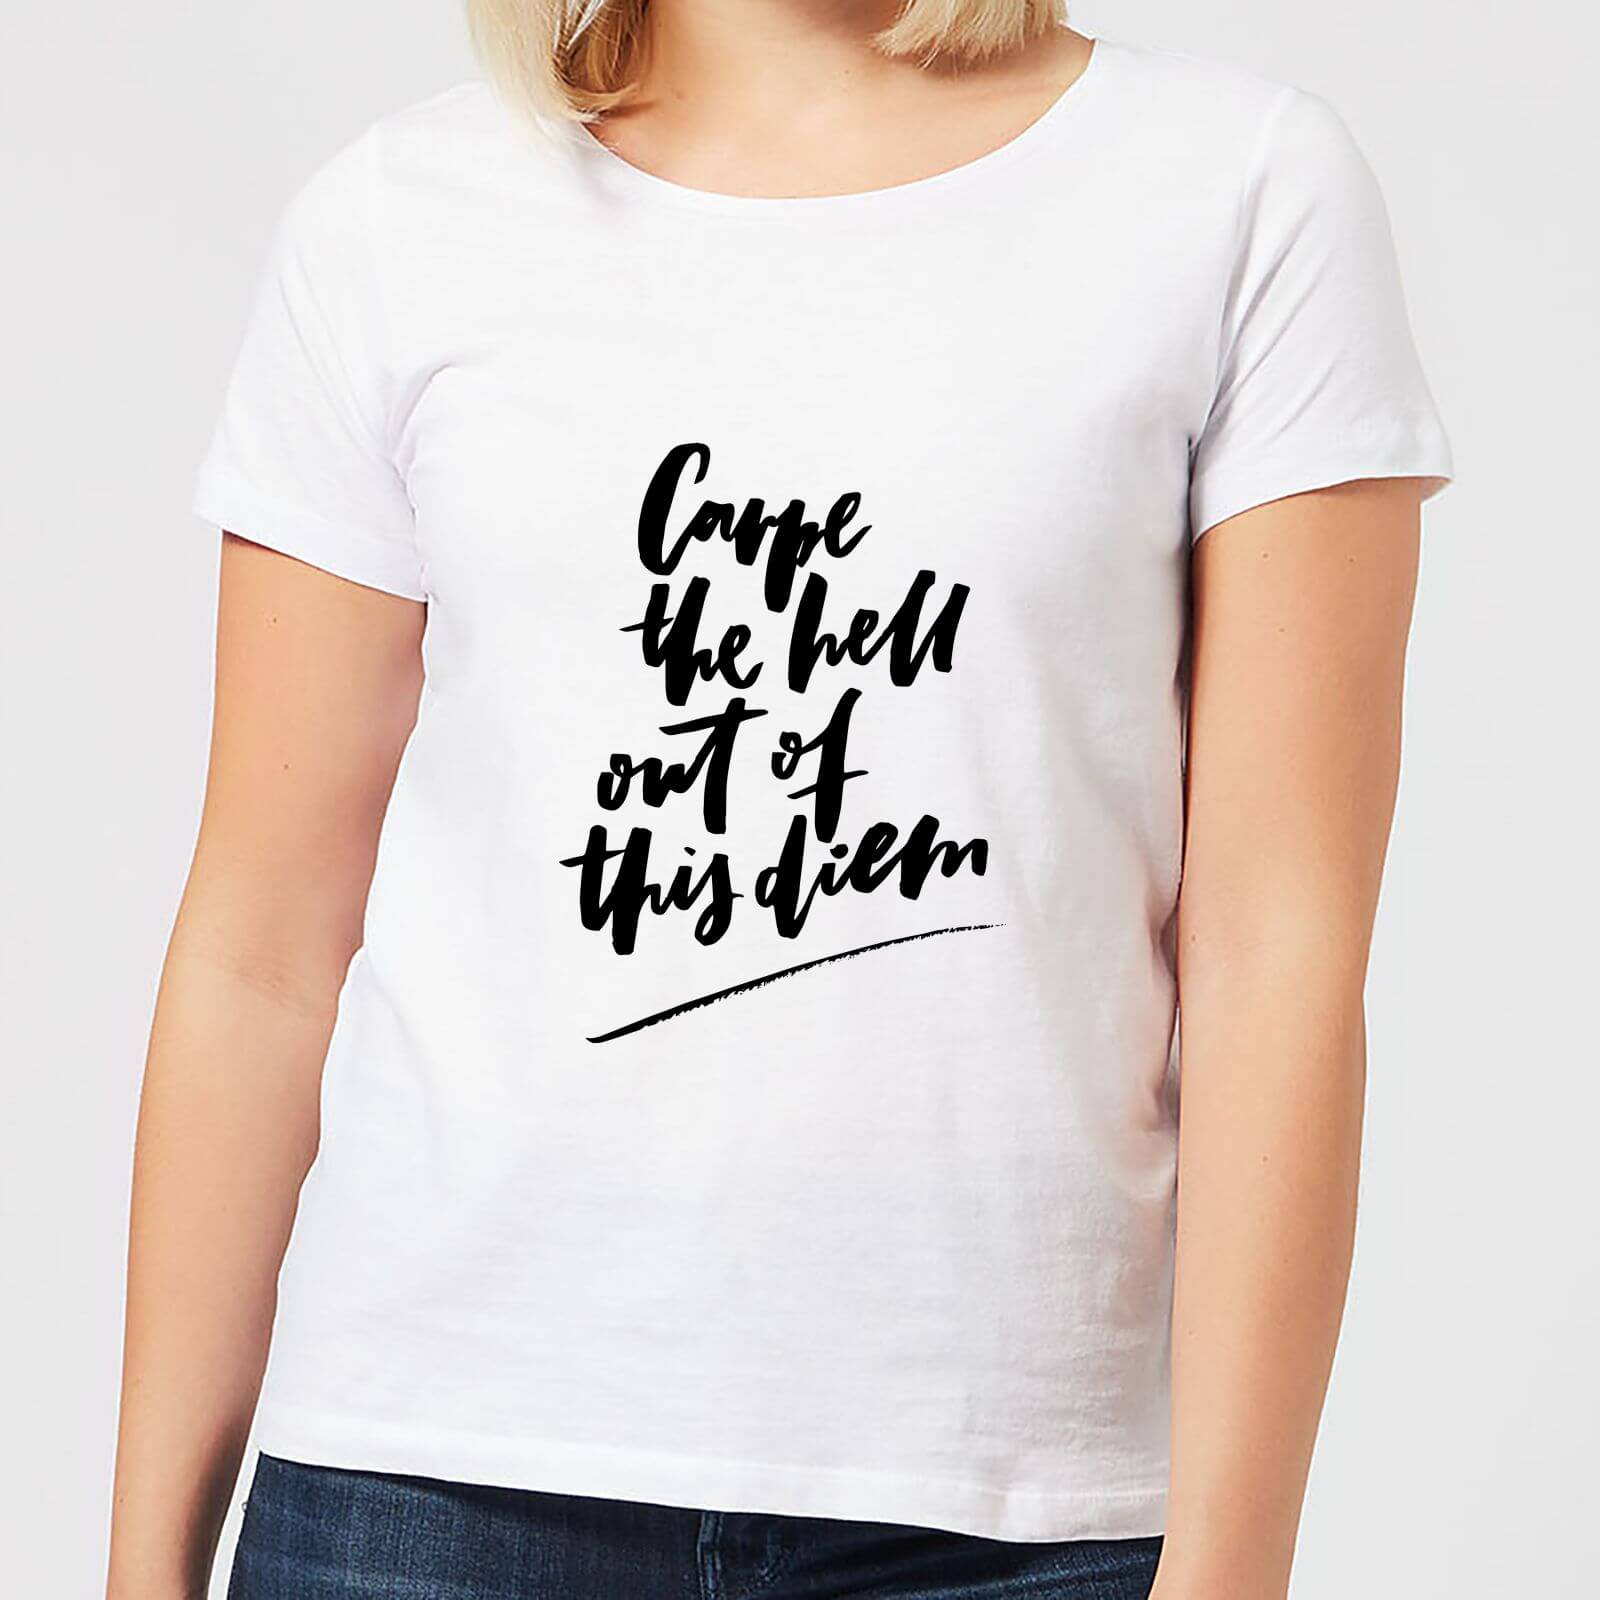 Carpe The Hell Out Of This Diem Women's T-Shirt - White - S - White